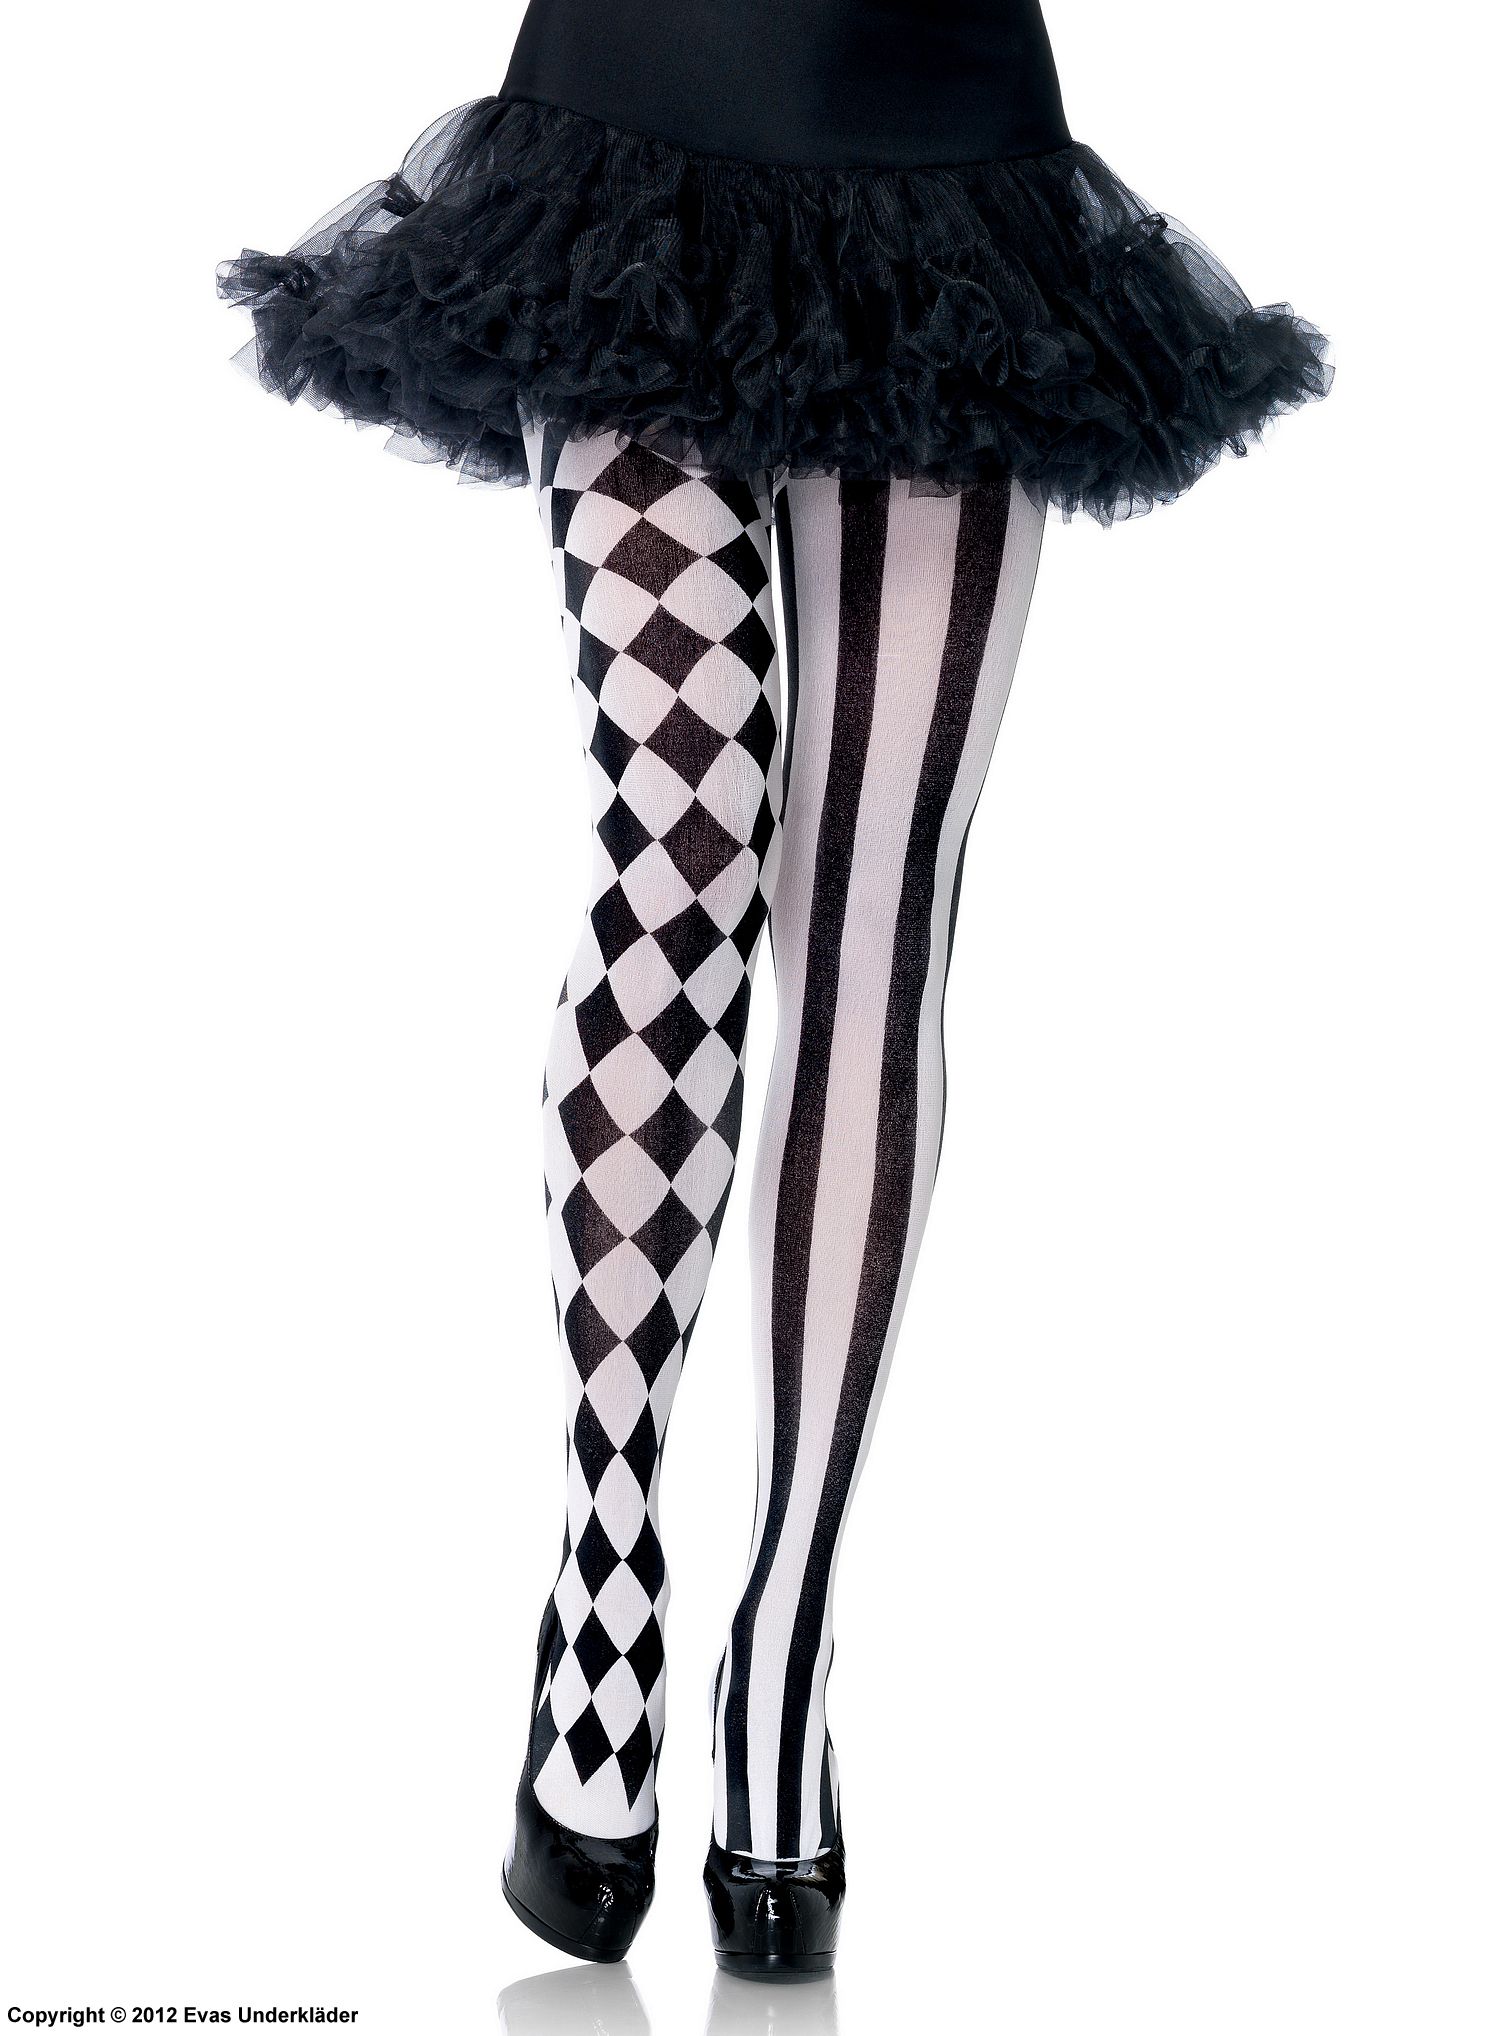 Pantyhose, harlequin with stripes and diamonds